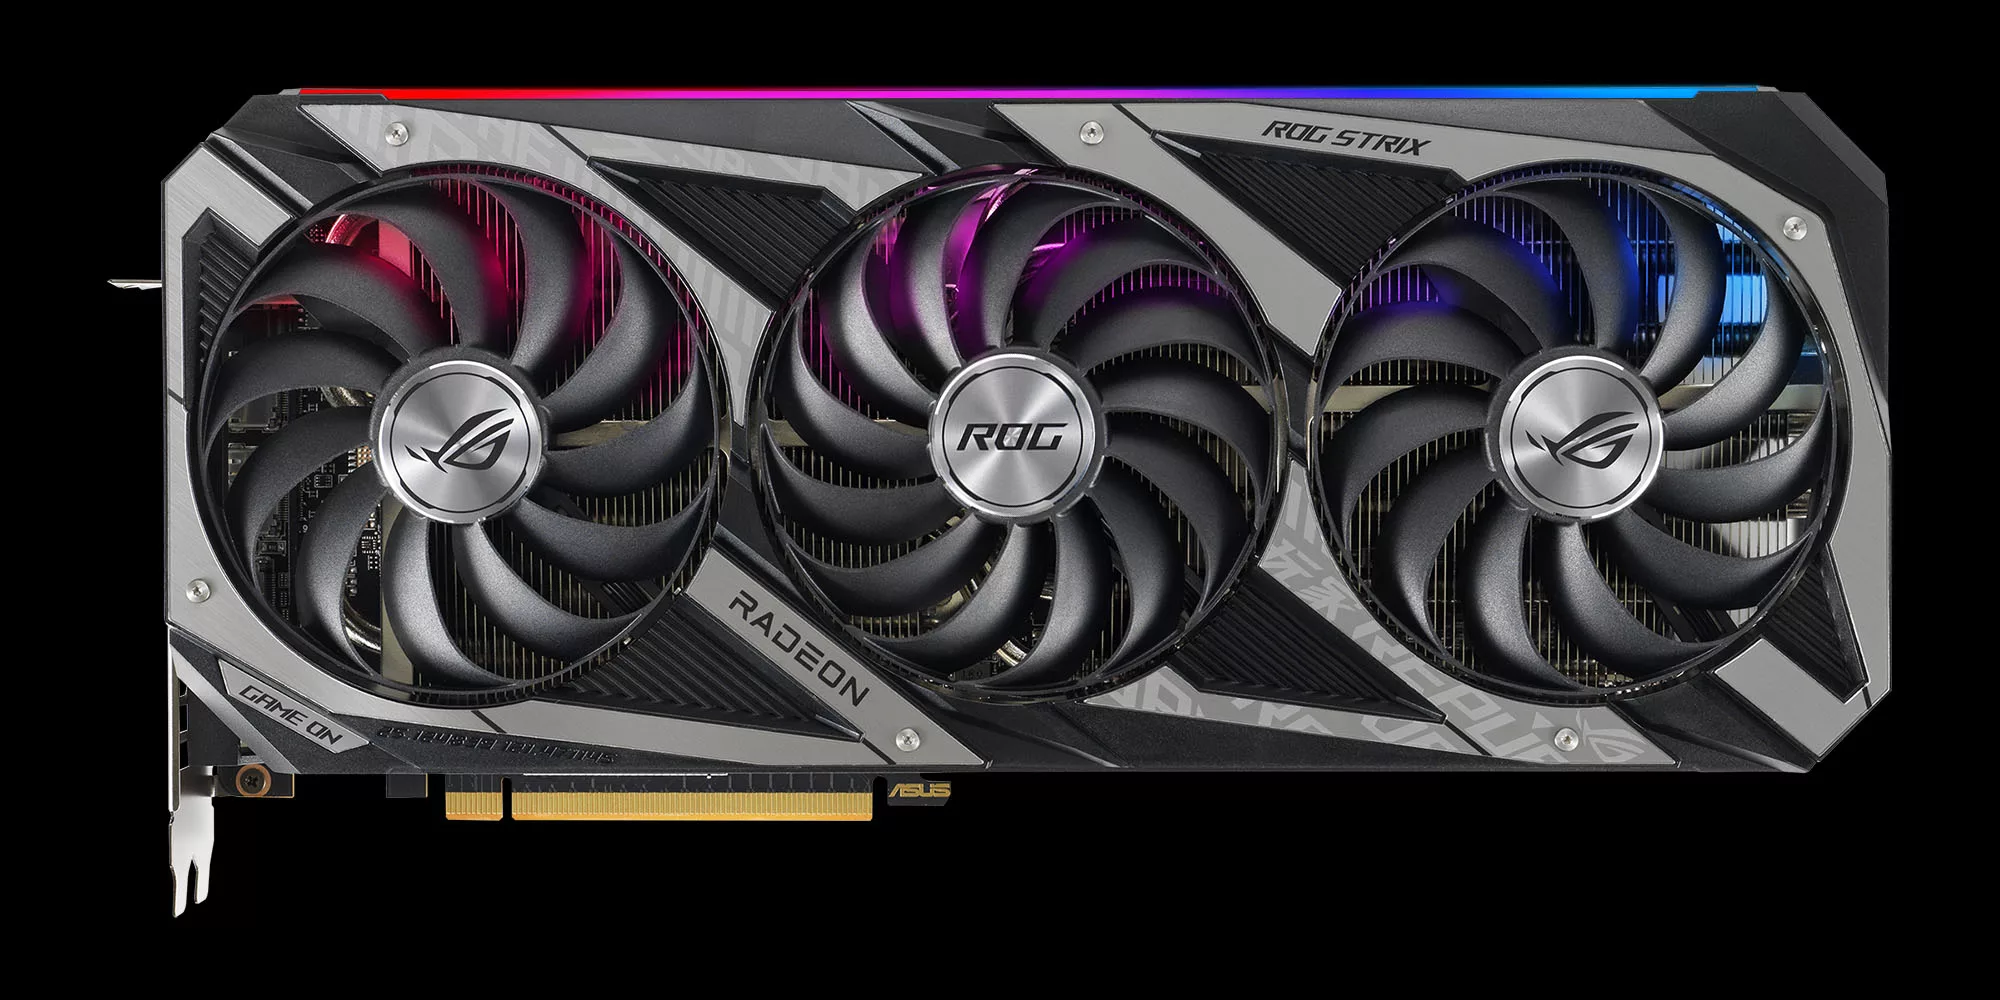 An image of the ROG Strix Radeon RX 6750 XT graphics card on a black background.